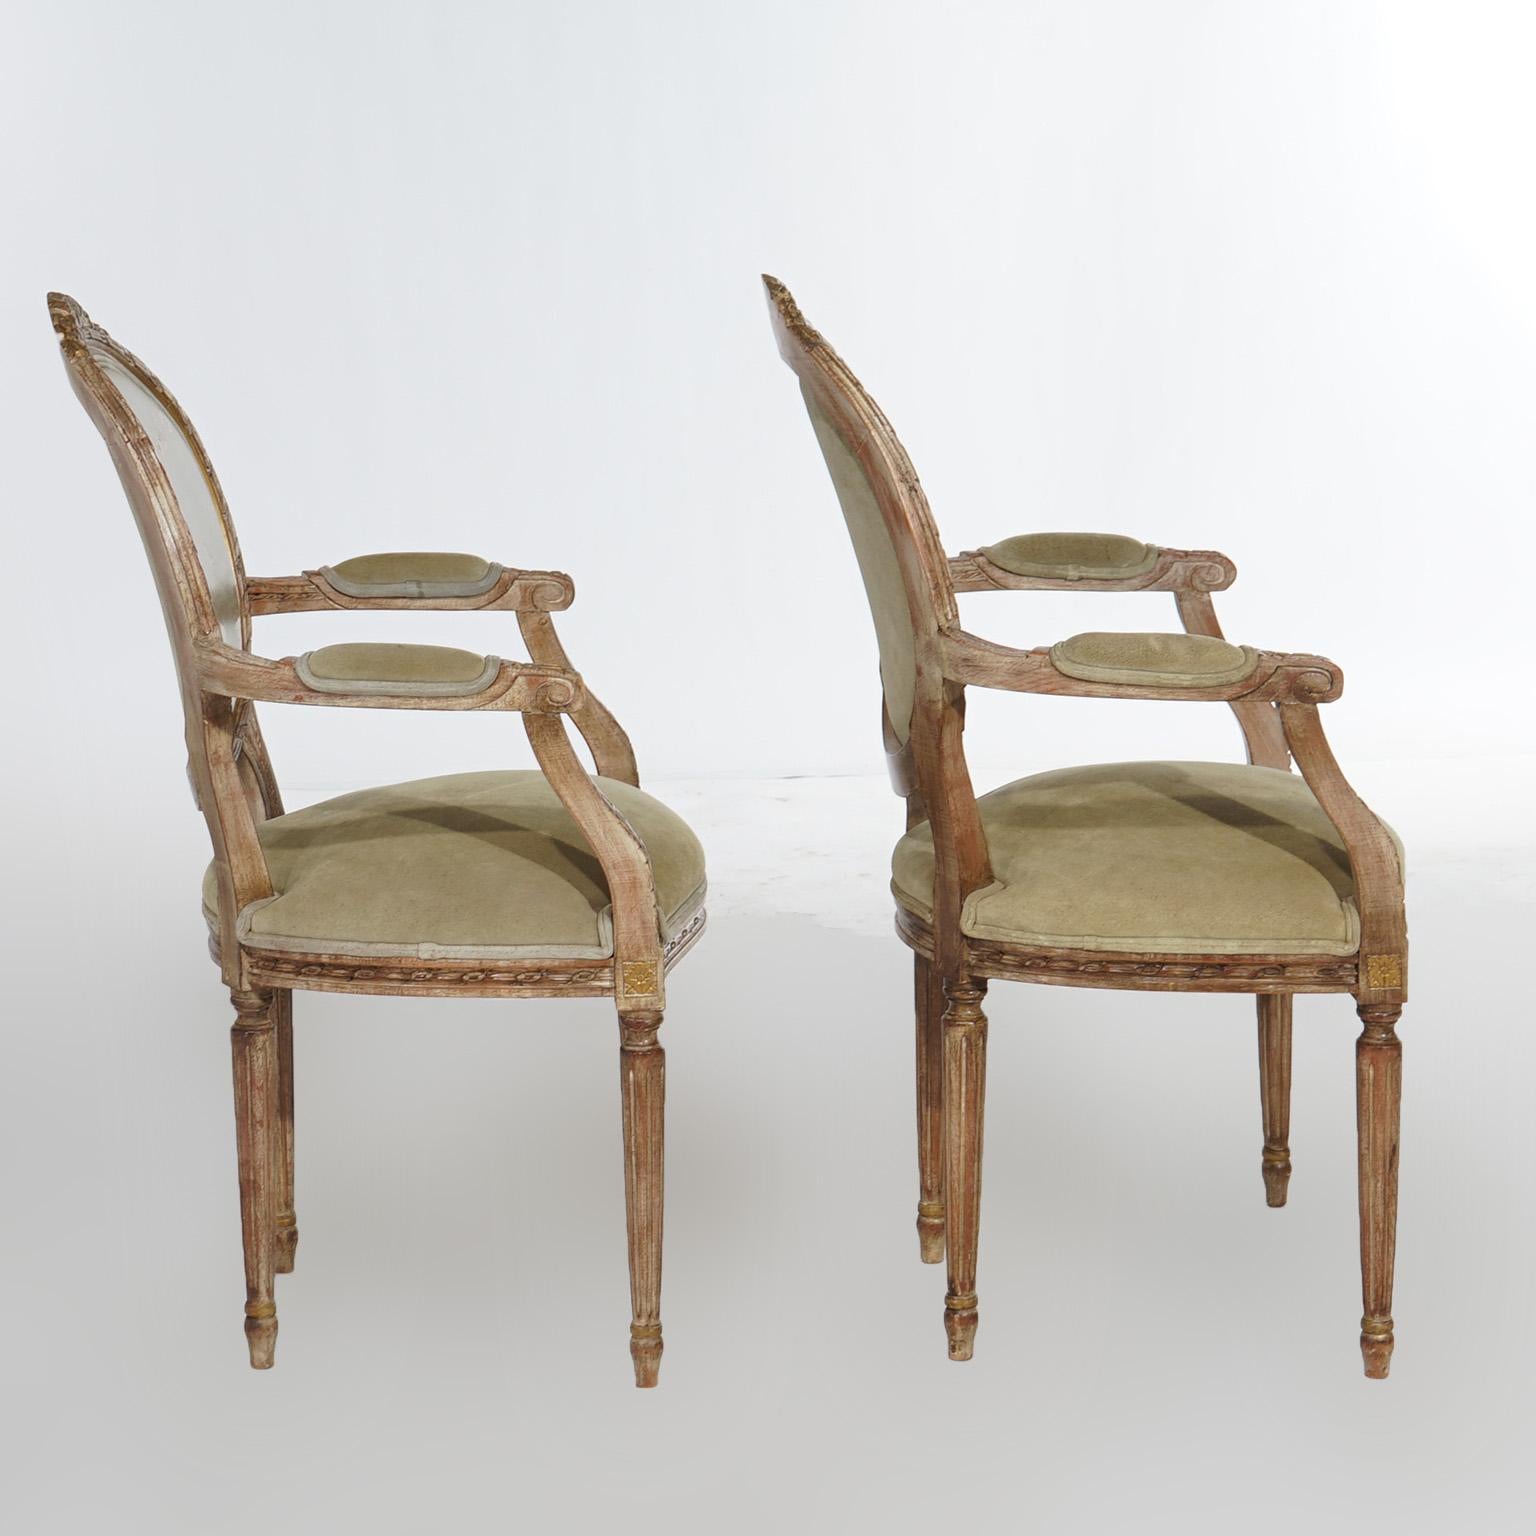 Antique Pair of Louis XVI Leather & Carved, Polychromed Giltwood Armchairs 20thC For Sale 1